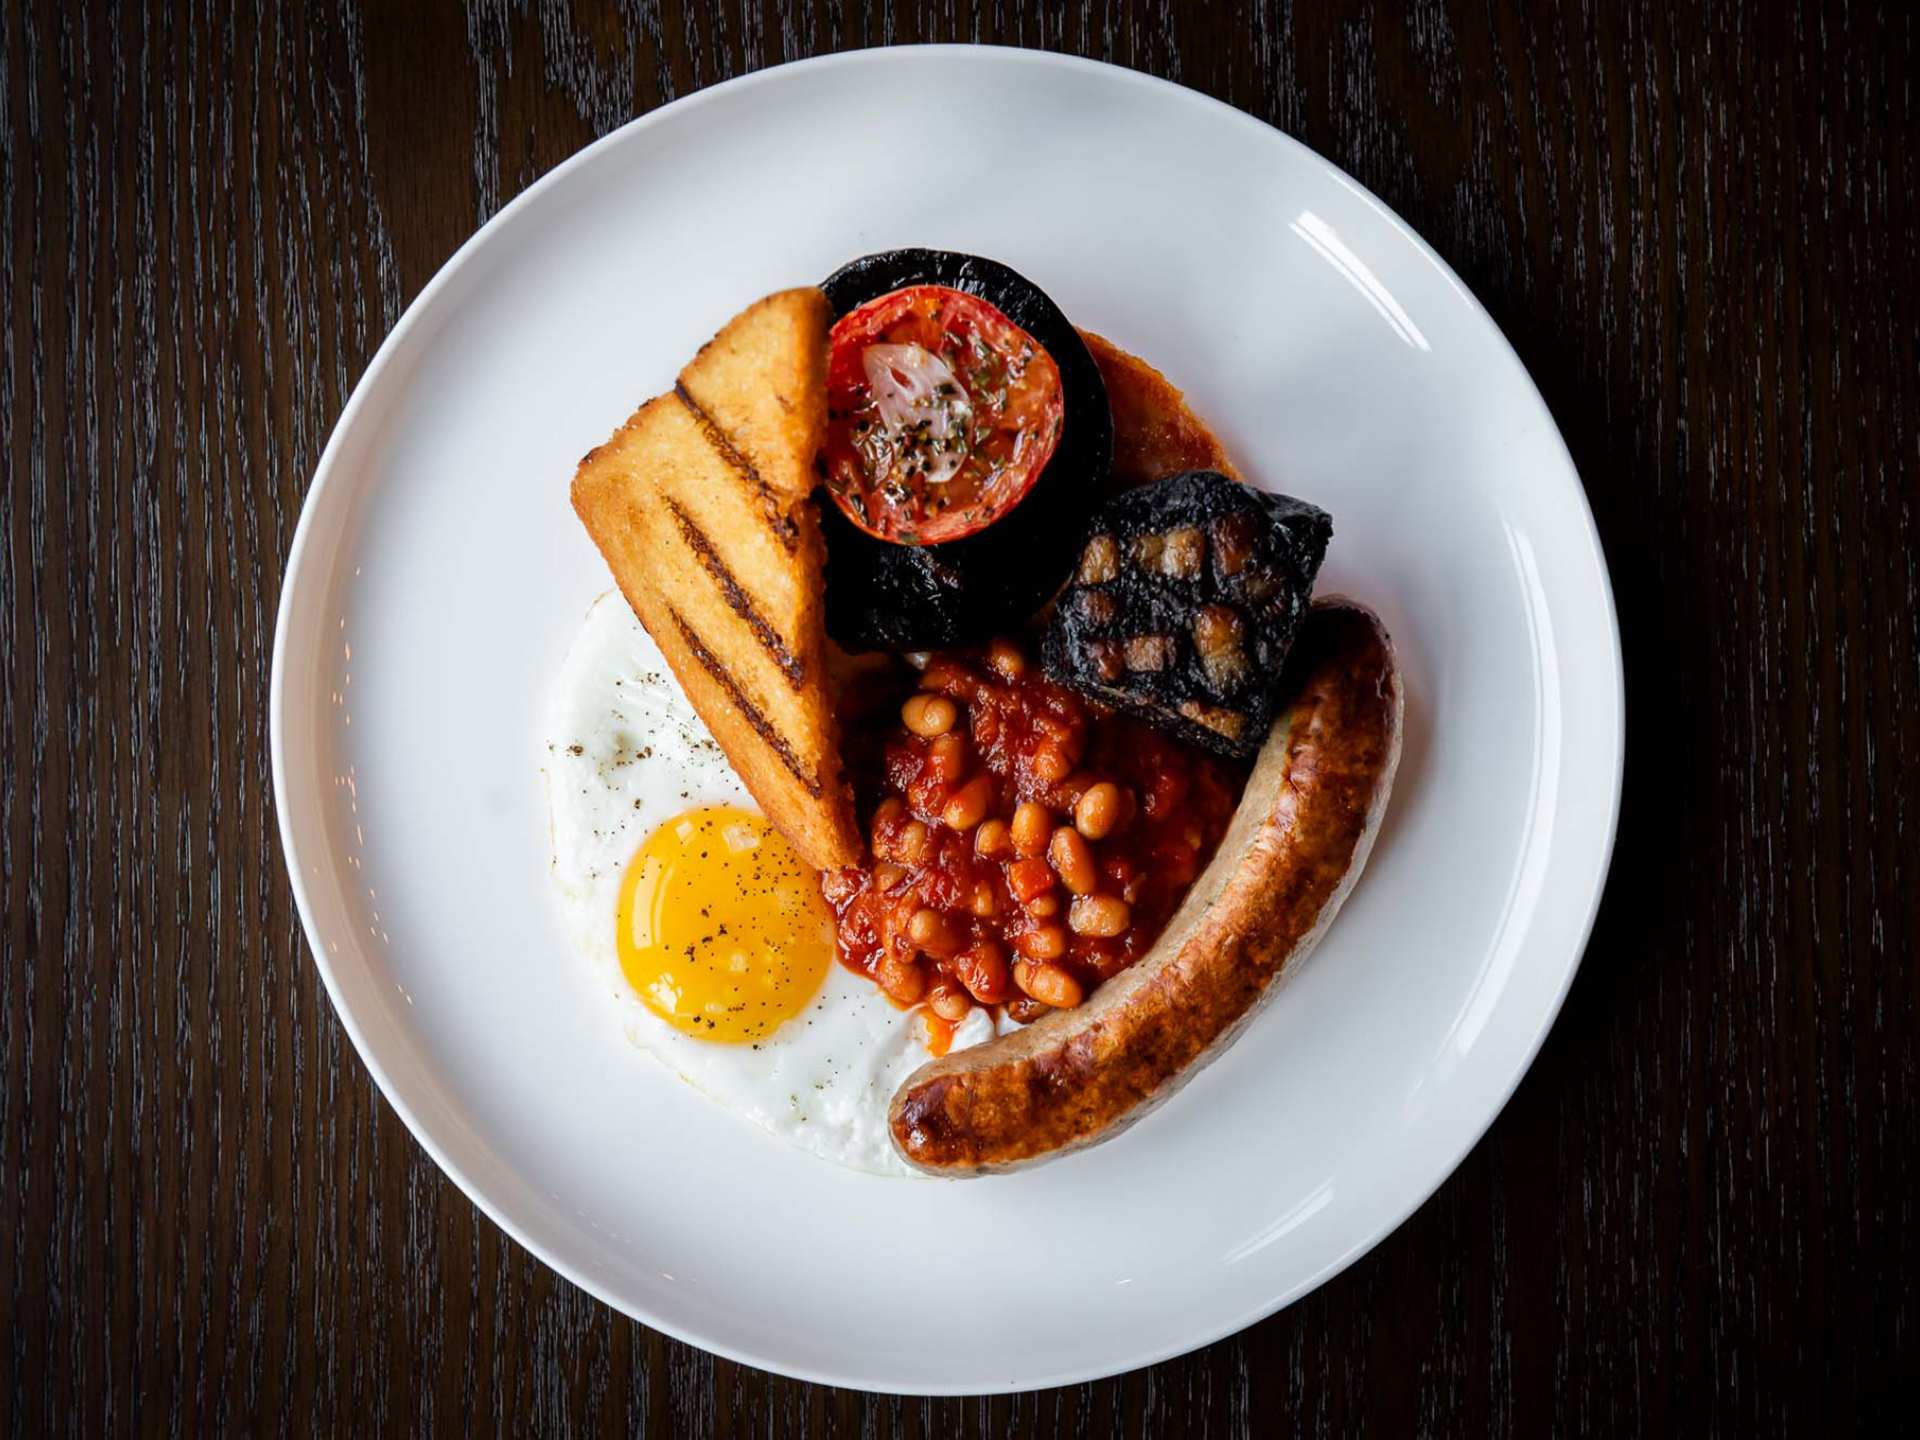 Best new restaurants Toronto | Beans, toast and a sausage at The Dorset